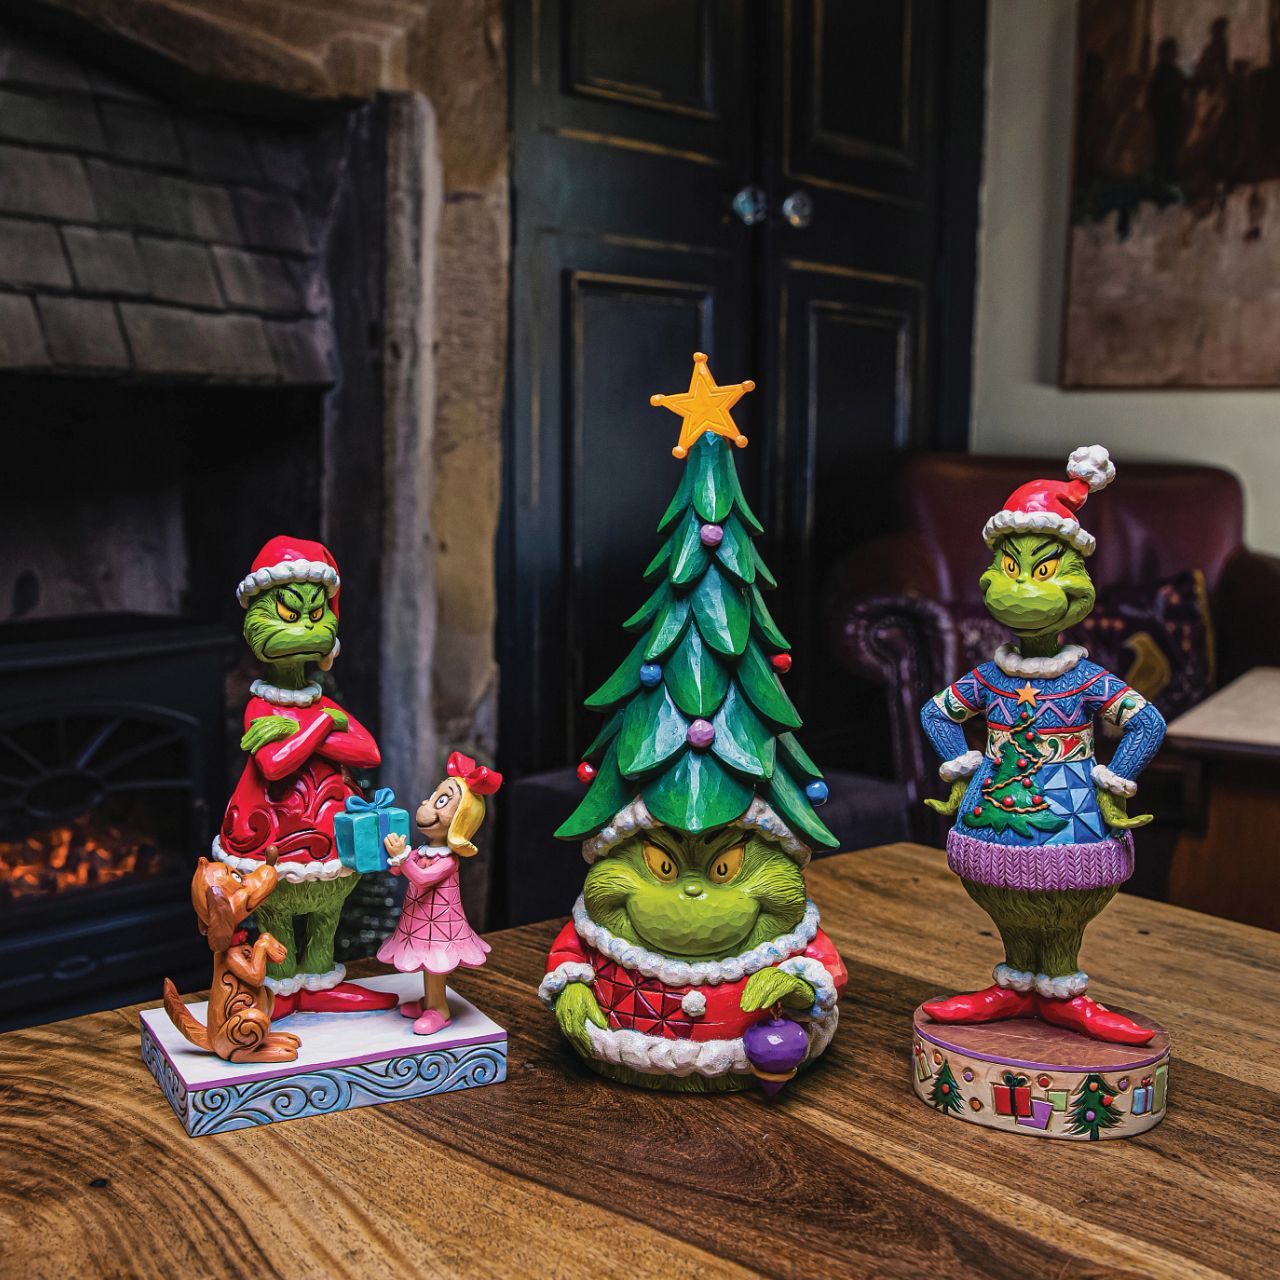 Grinch Wearing Ugly Sweater Figurine  The Grinch shows his love for a Christmas jumper in this figurine. Designed by award winning folk artist Jim Shore his jumper is intricately designed with so much detail it looks almost real.